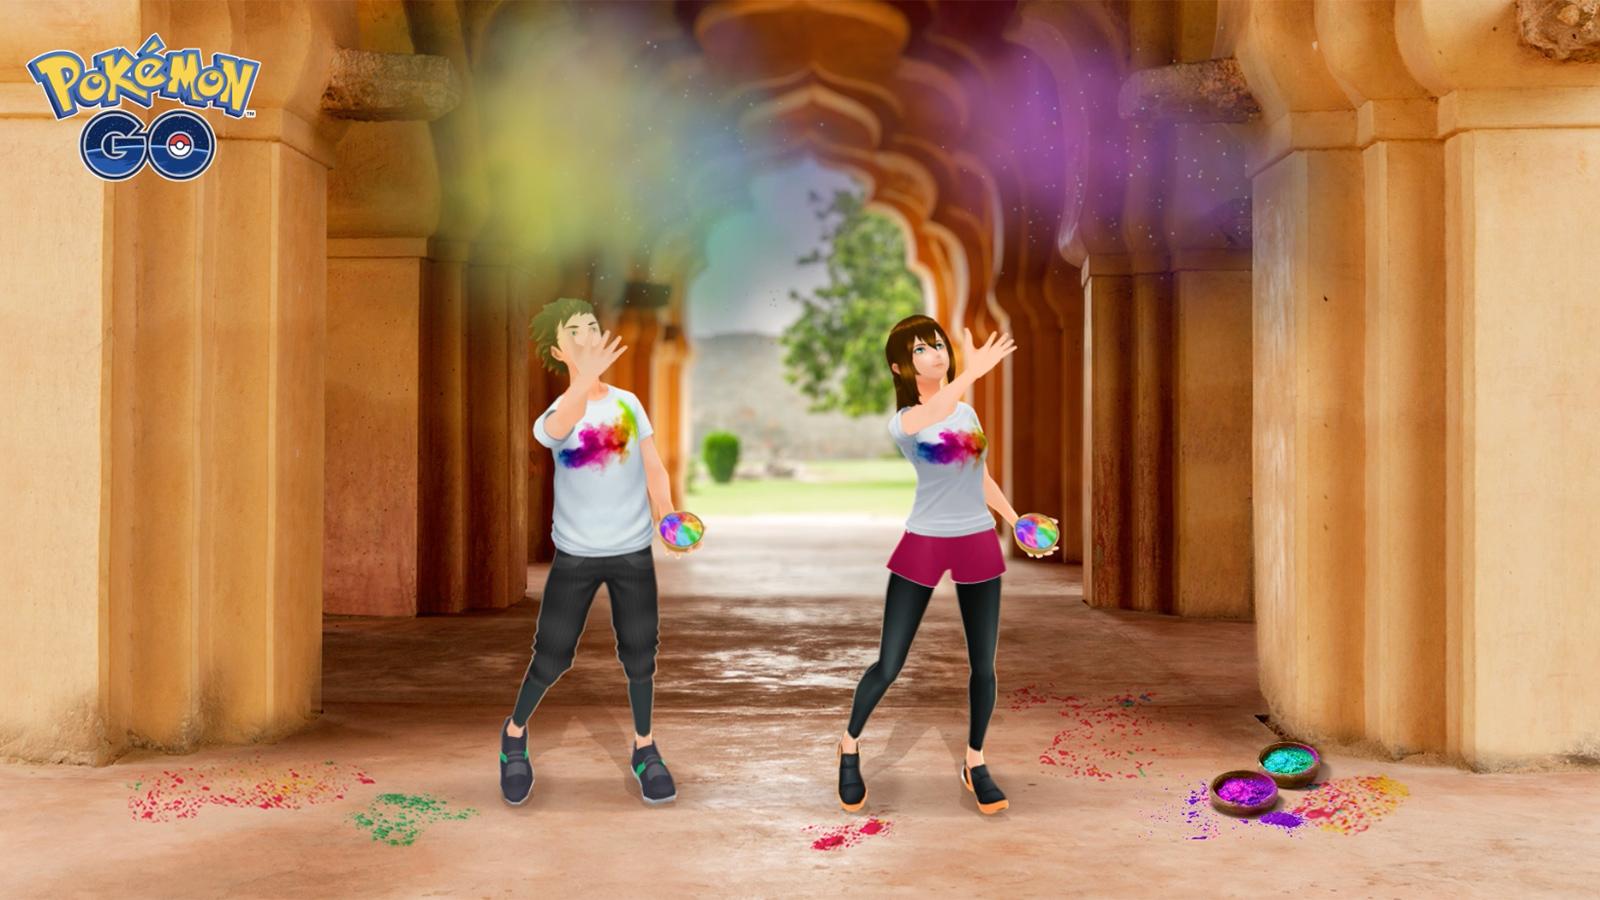 The Festival of Colors avatar poses in Pokemon Go